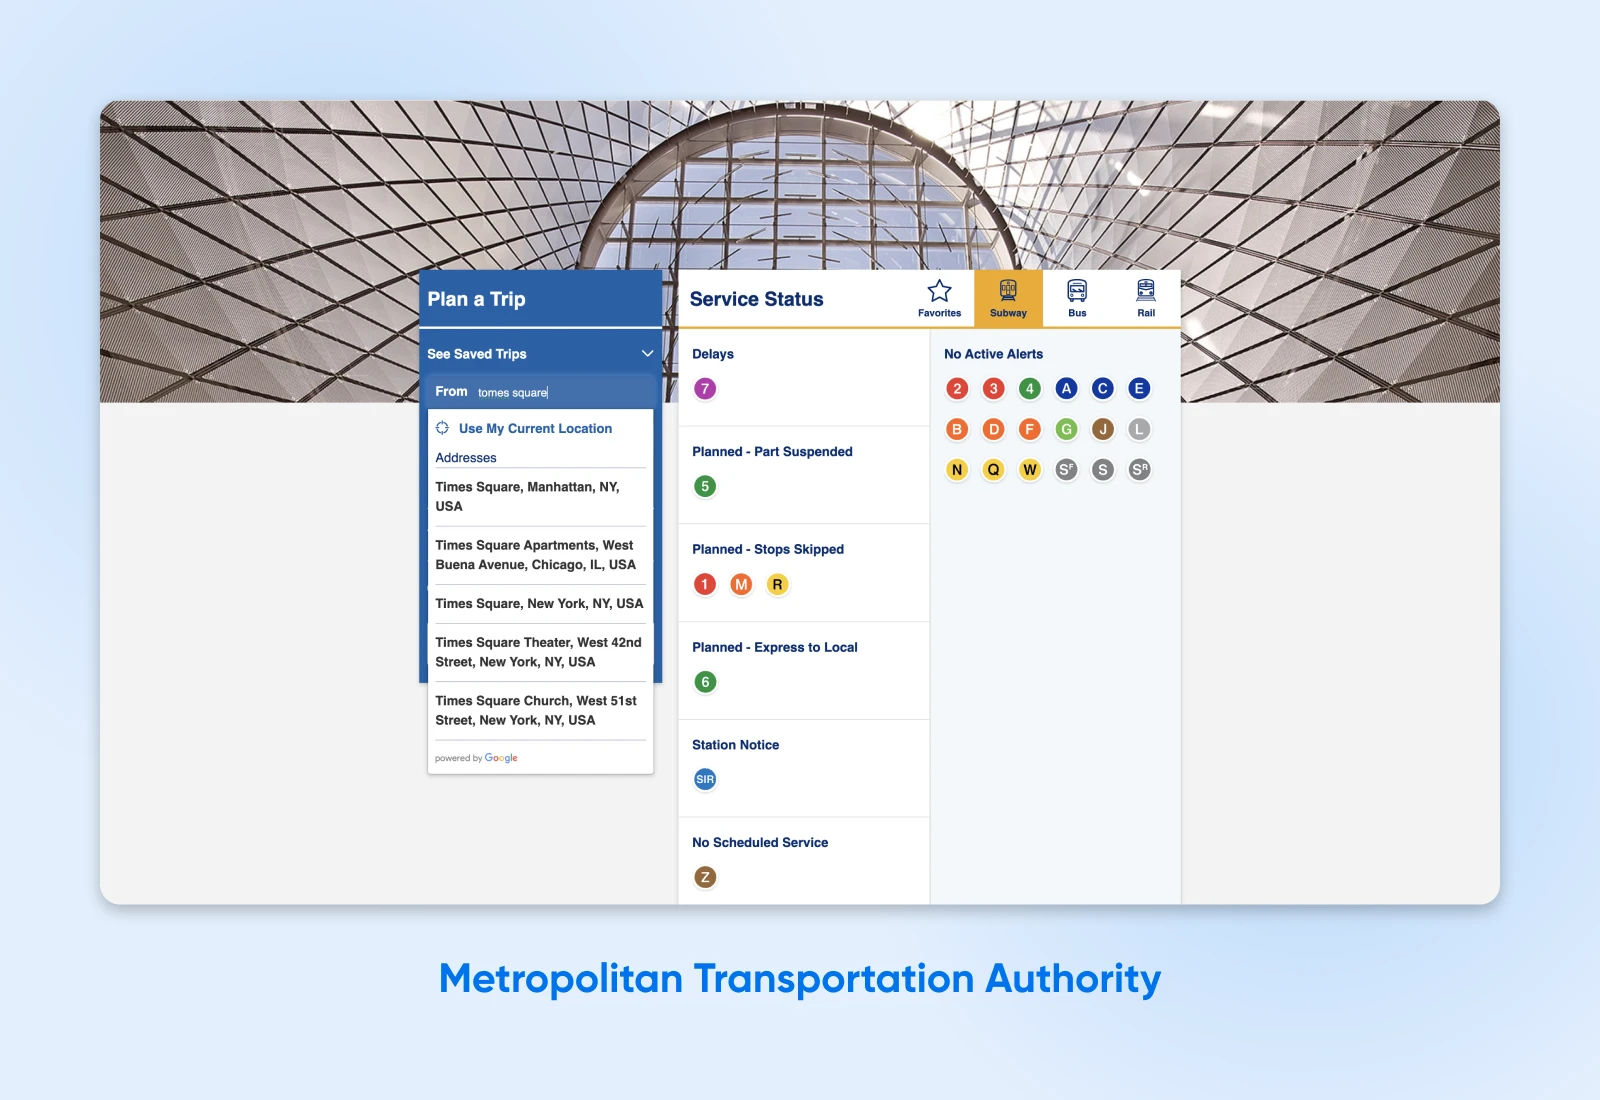 MTA website with drop-downs doe "Plan a Trip" and "Service Status" showing delays and planned trips in different colors.